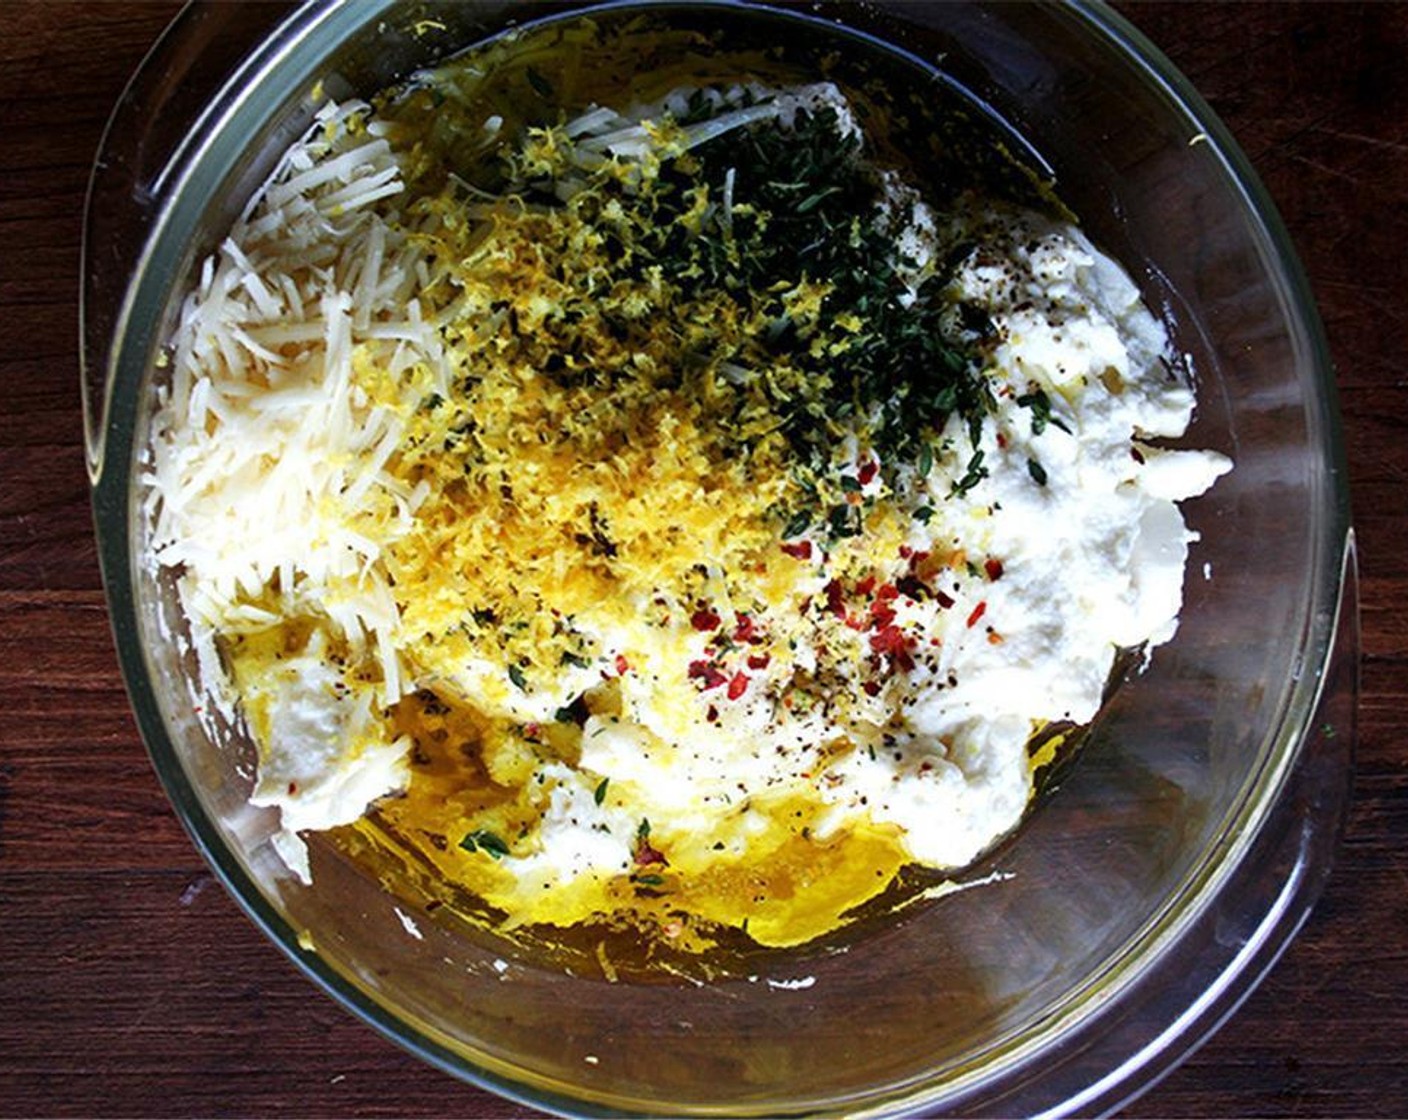 step 2 Combine Ricotta Cheese (2 cups), Garlic (3 cloves), Fresh Thyme (3 Tbsp), Lemon (1), Freshly Ground Black Pepper (to taste), Kosher Salt (1 tsp), Extra-Virgin Olive Oil (1/4 cup), Parmesan Cheese (1/4 cup) and Crushed Red Pepper Flakes (to taste). Mix until well combined.